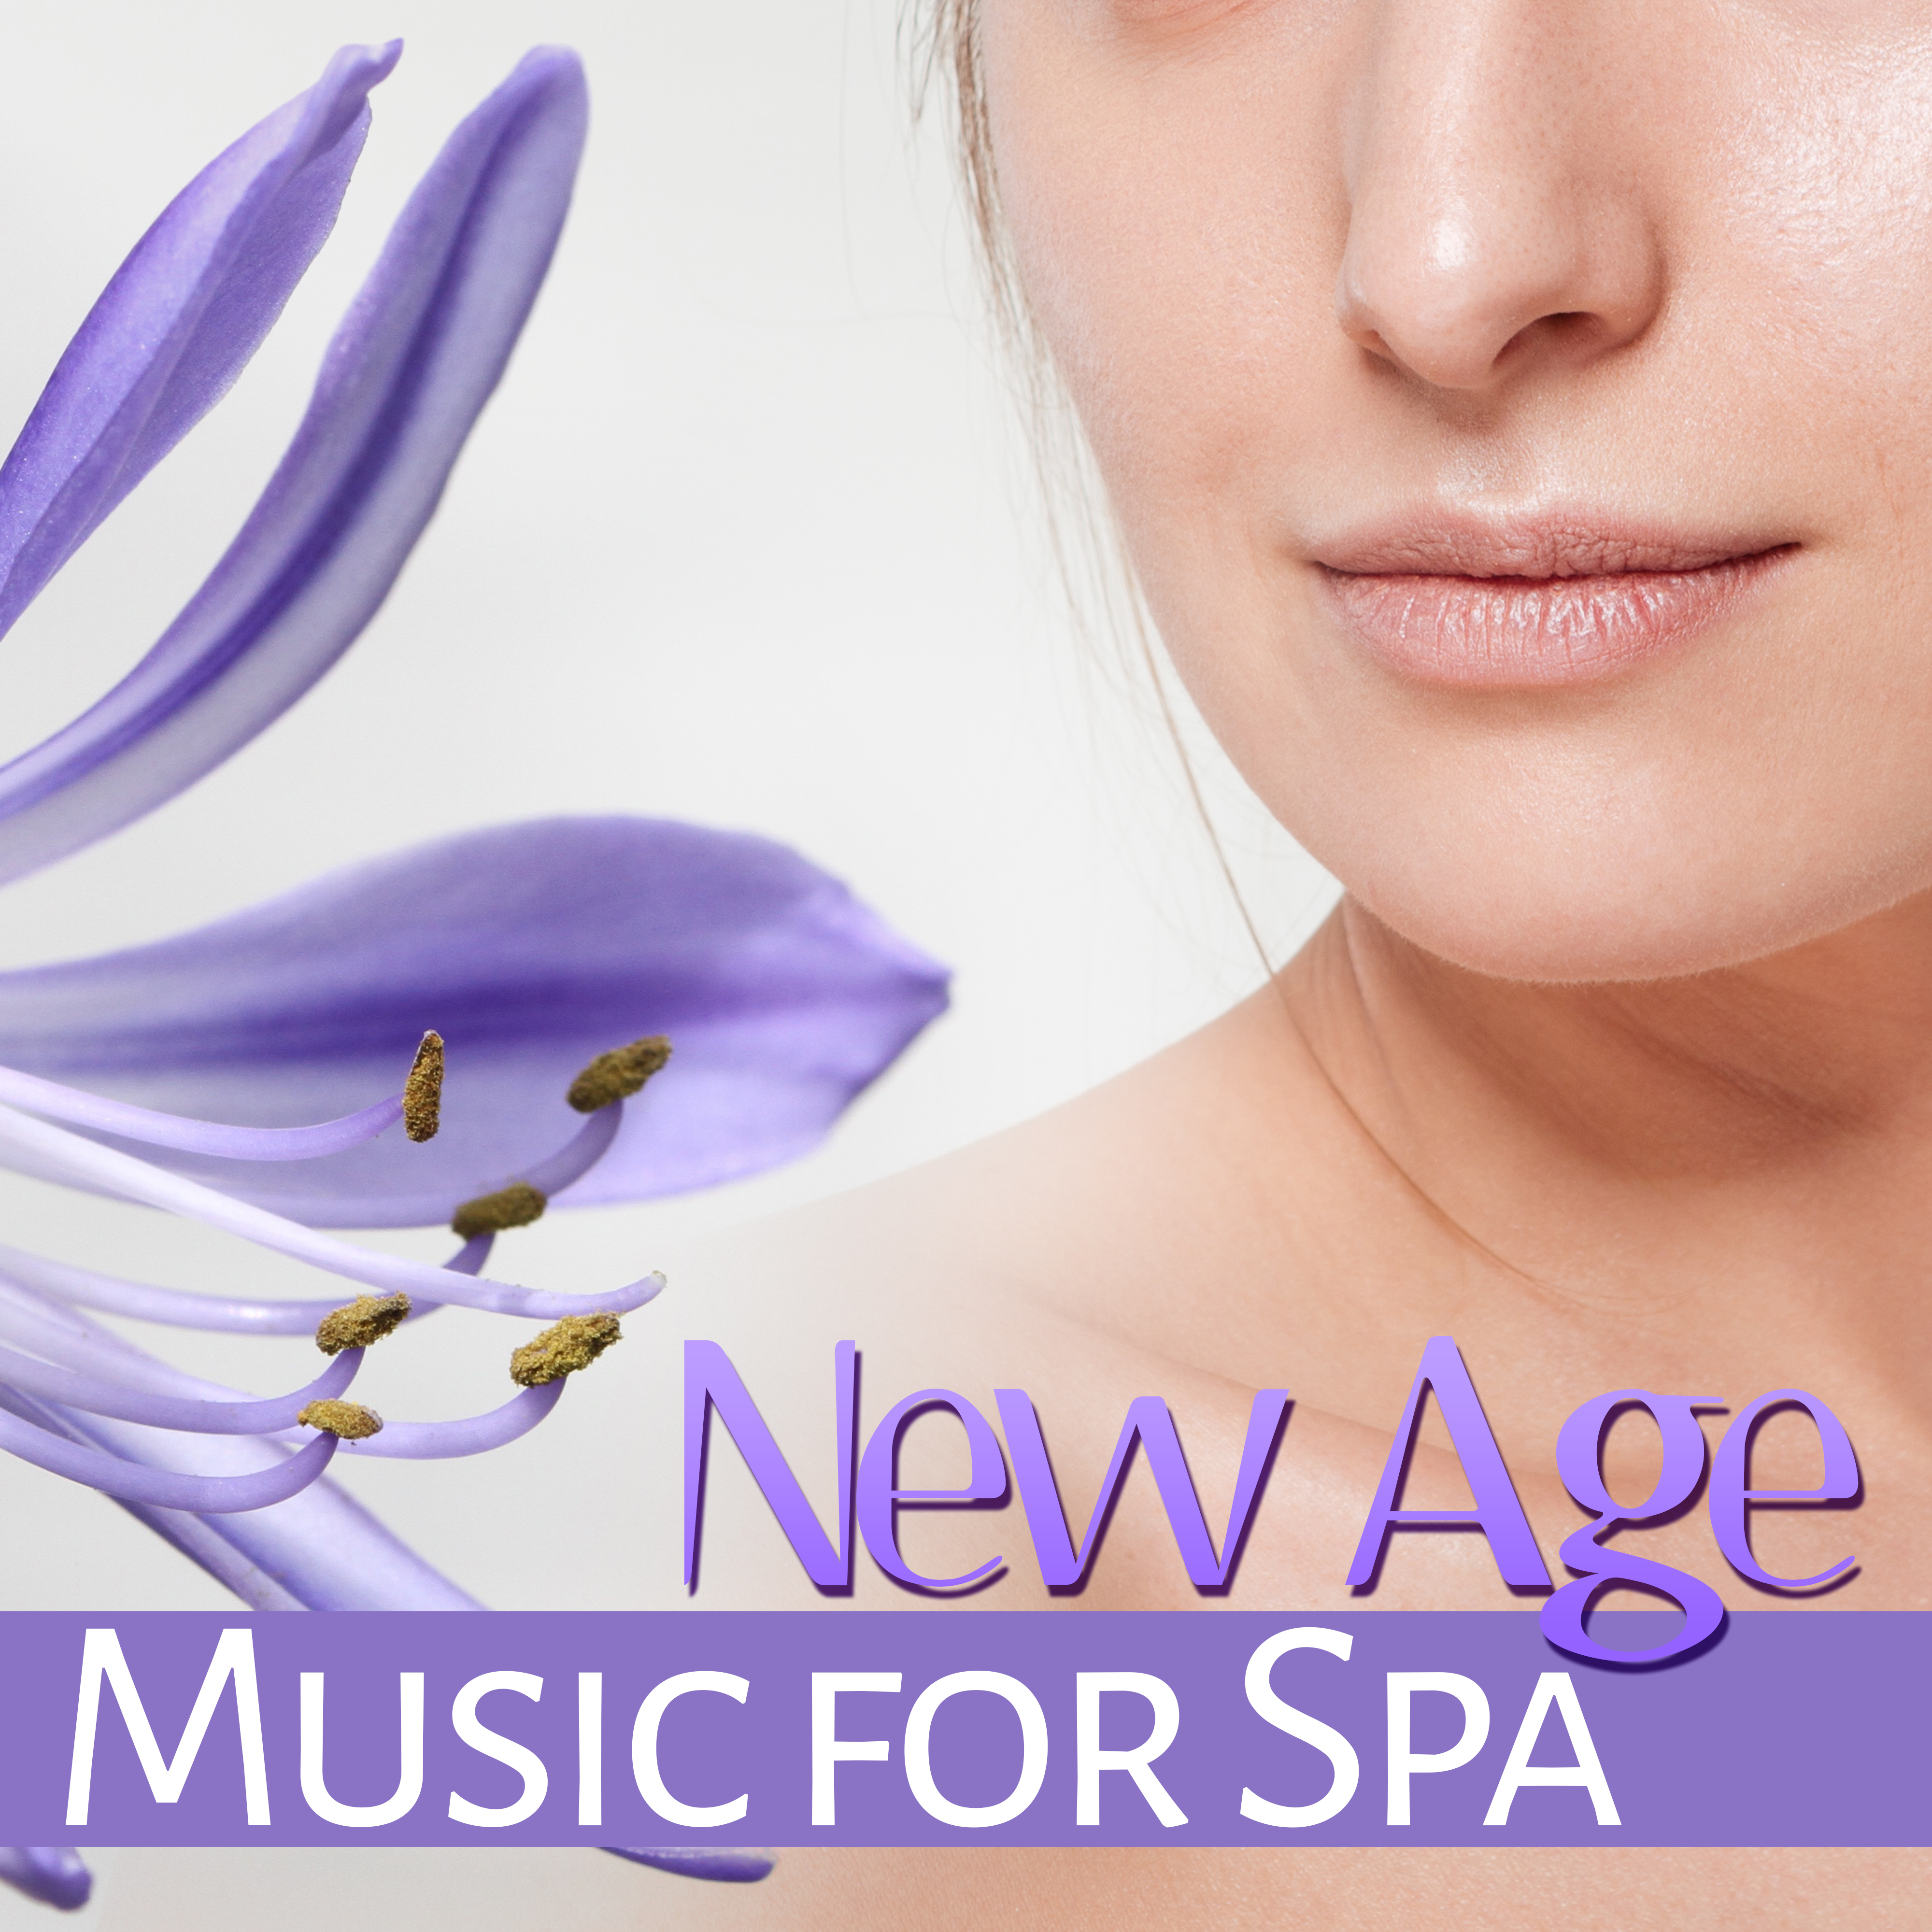 New Age Music for Spa – Calm Down, Anti Stress Sounds for Massage, Wellness, Pure Sleep, Relief, Relaxation, Nature Sounds